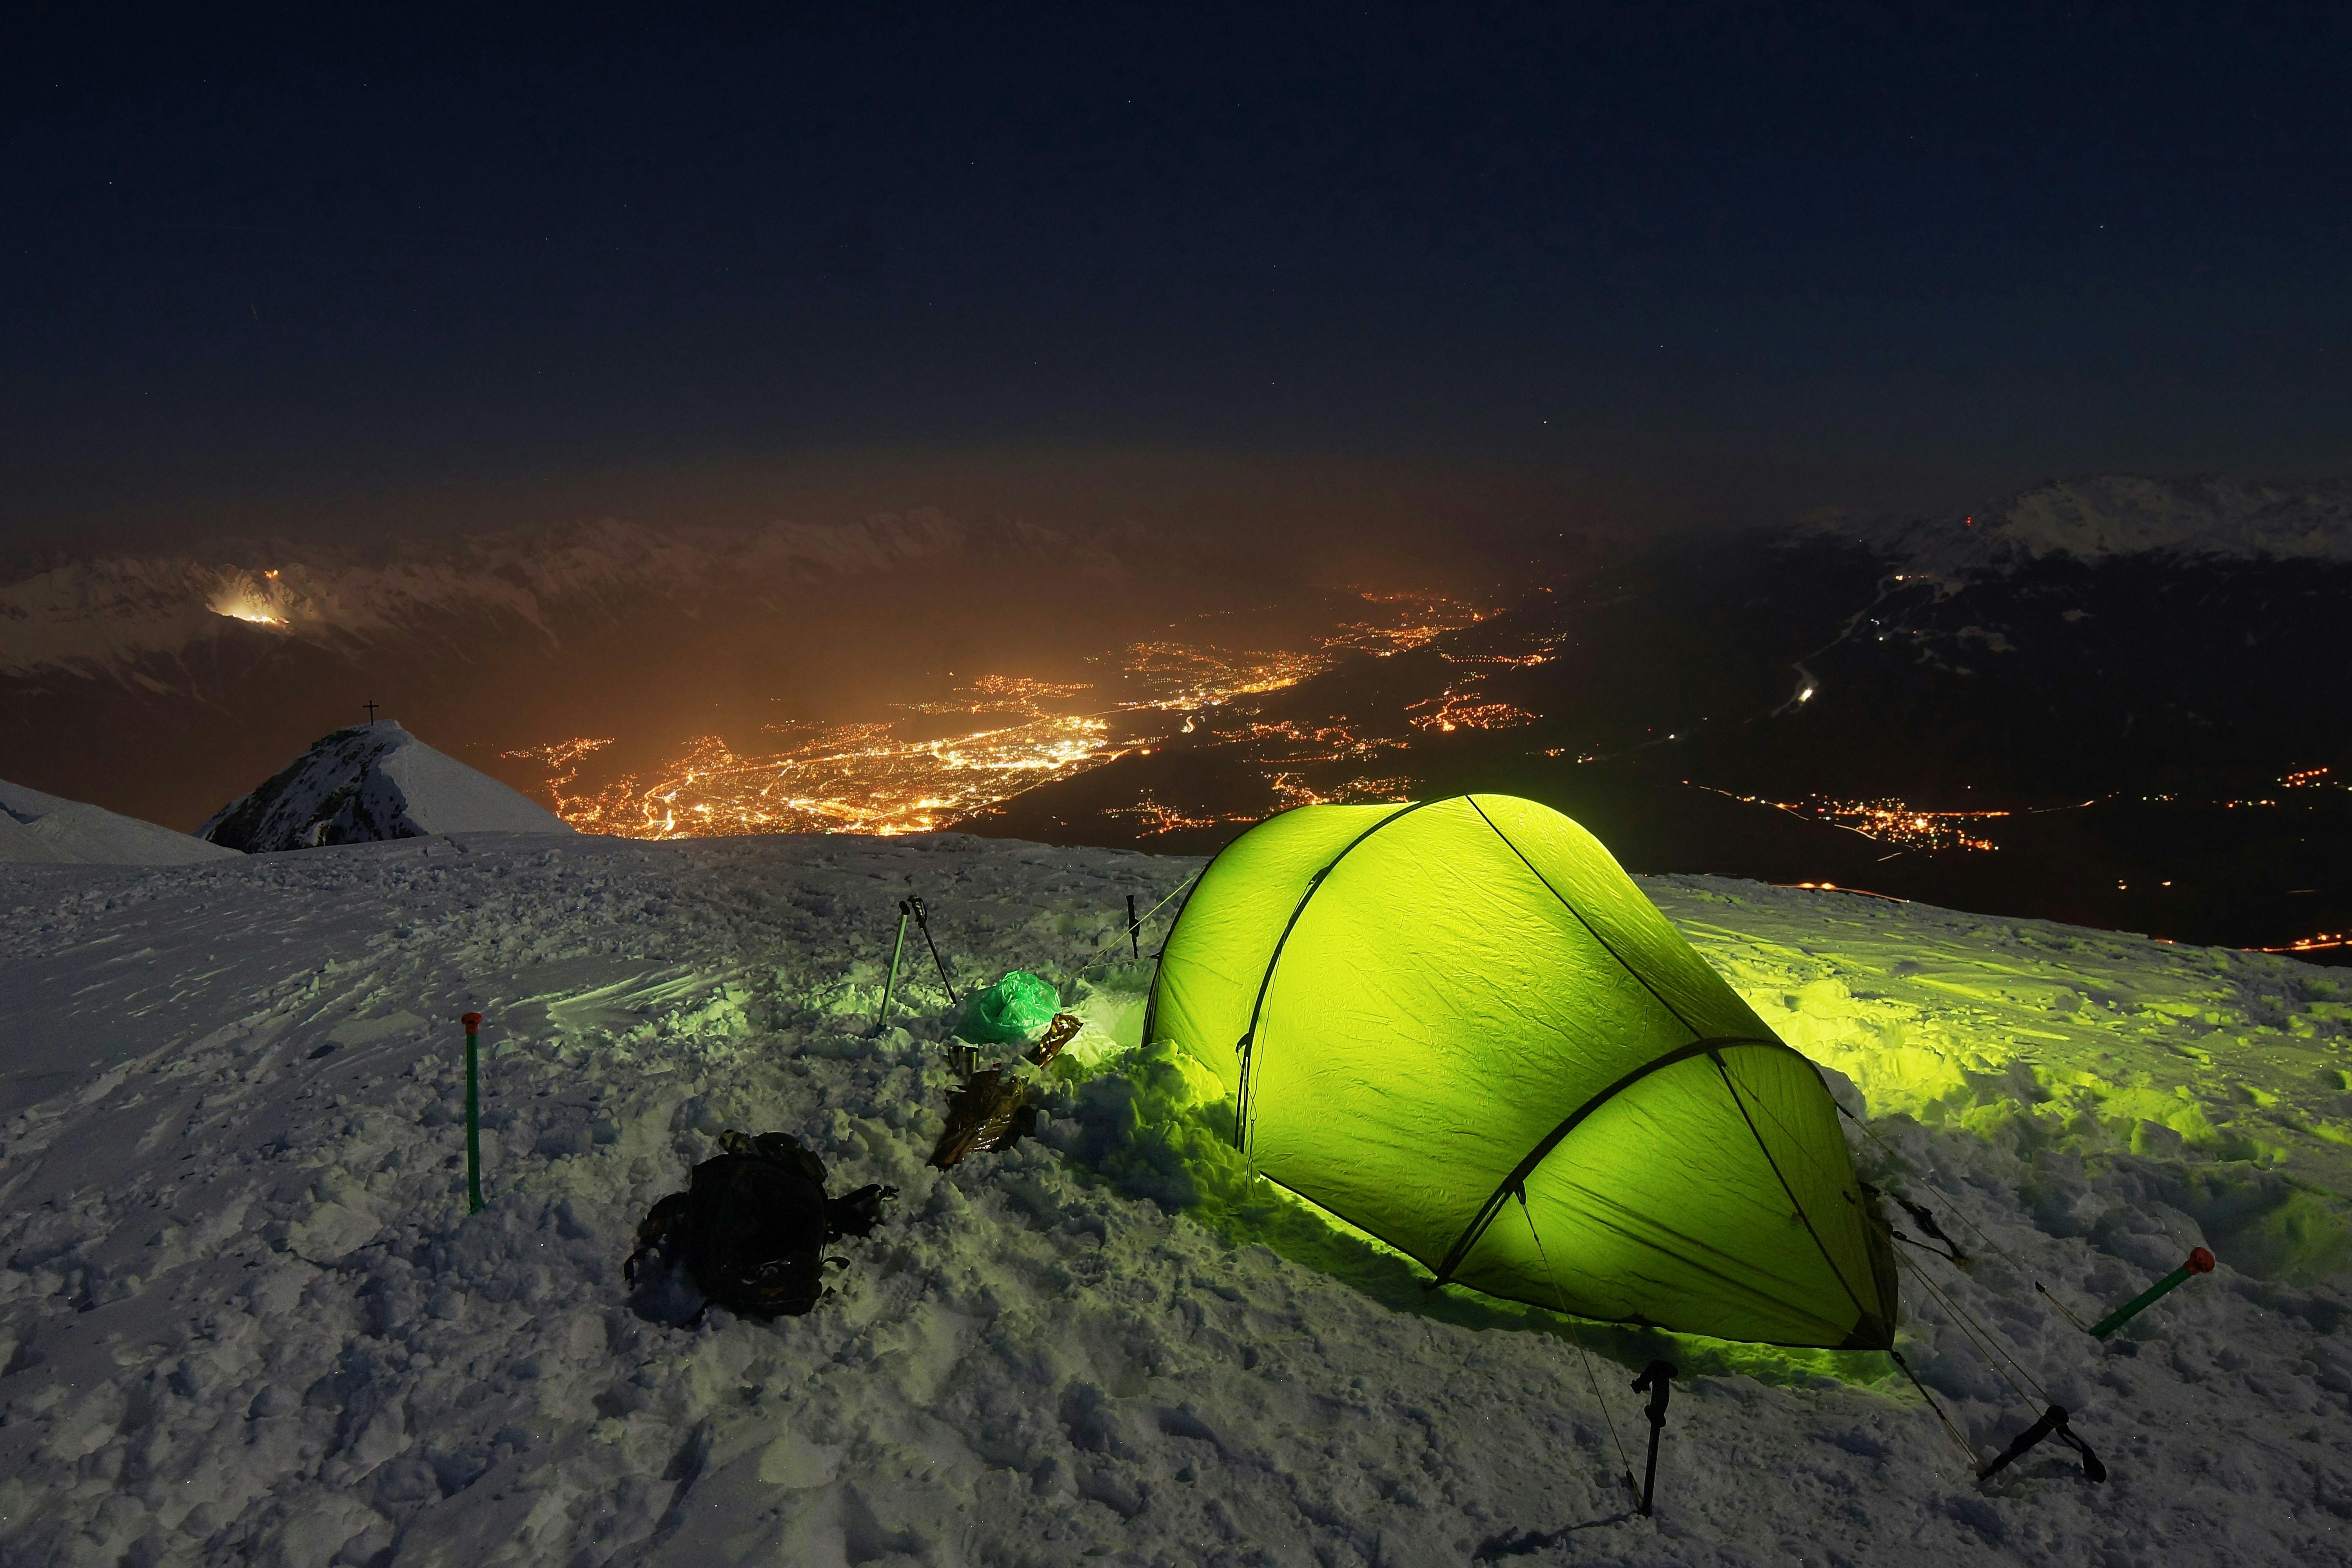 A light illuminating a bright green tent from within. The tent is set up on the snow, the night sky and brightly lit city in the valley in the distance